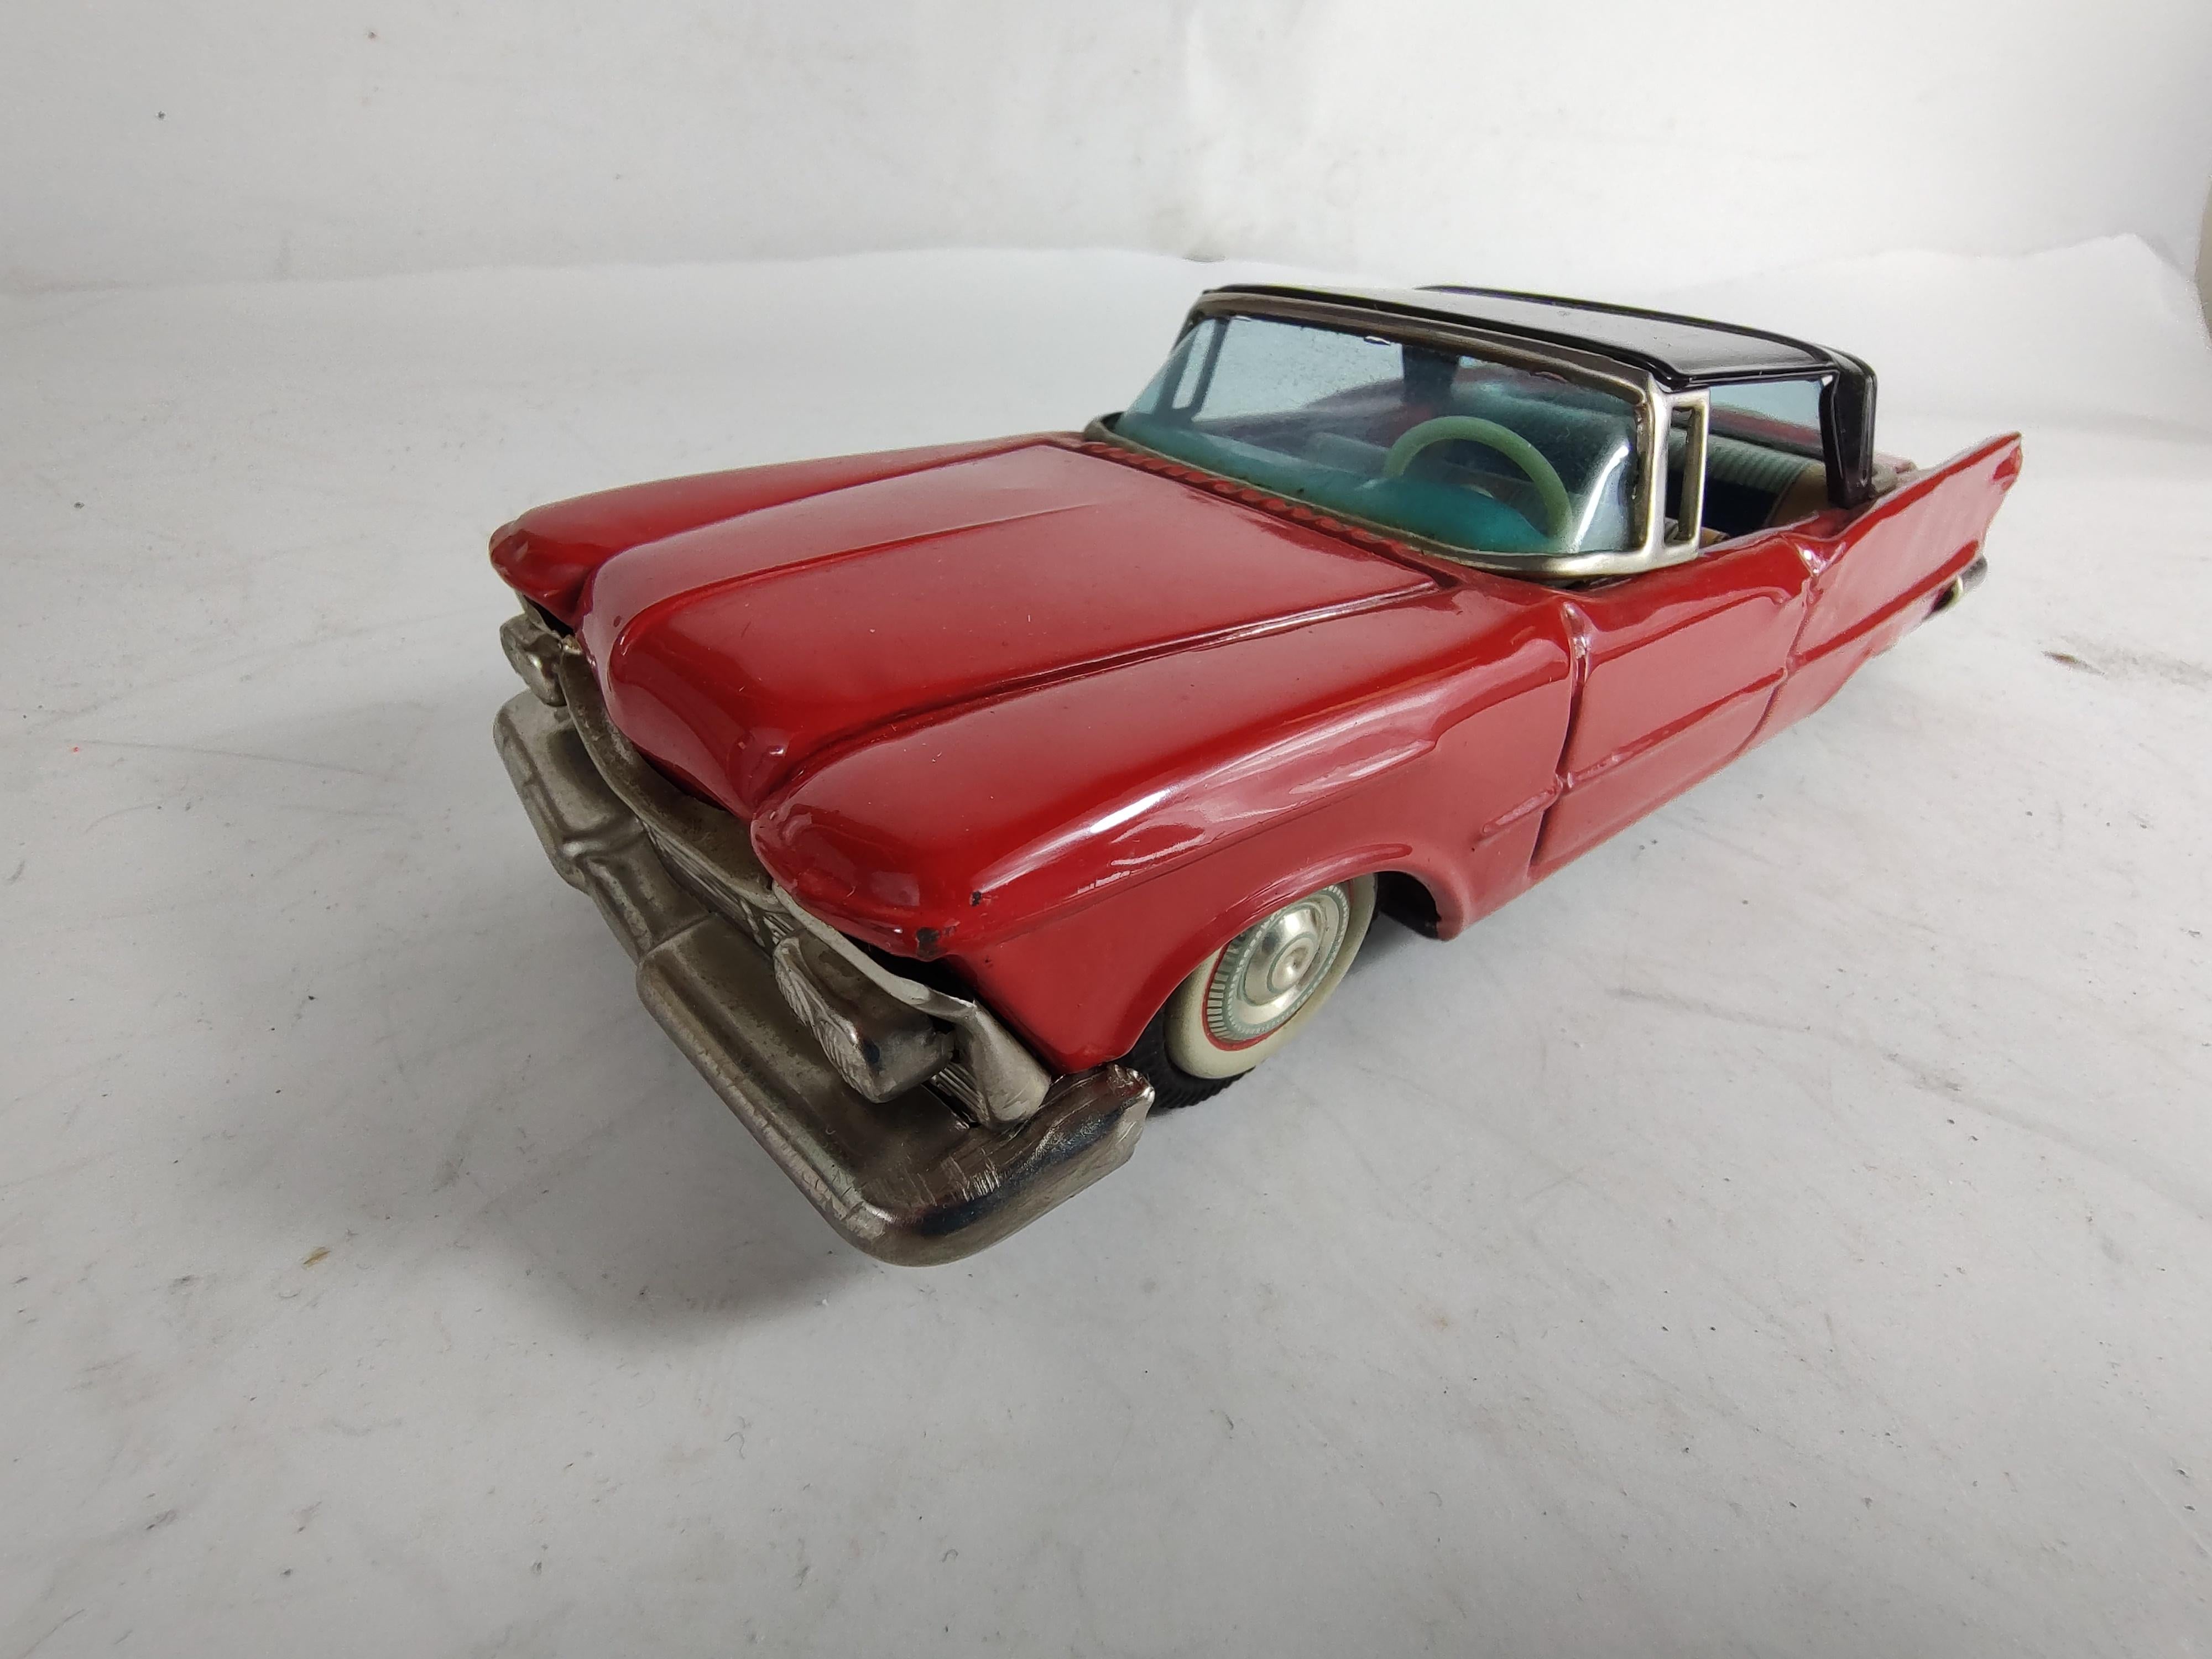 Midcentury Tin Litho Toy Car by Bandai Japan 1959 Chrysler Imperial in Red Black 3